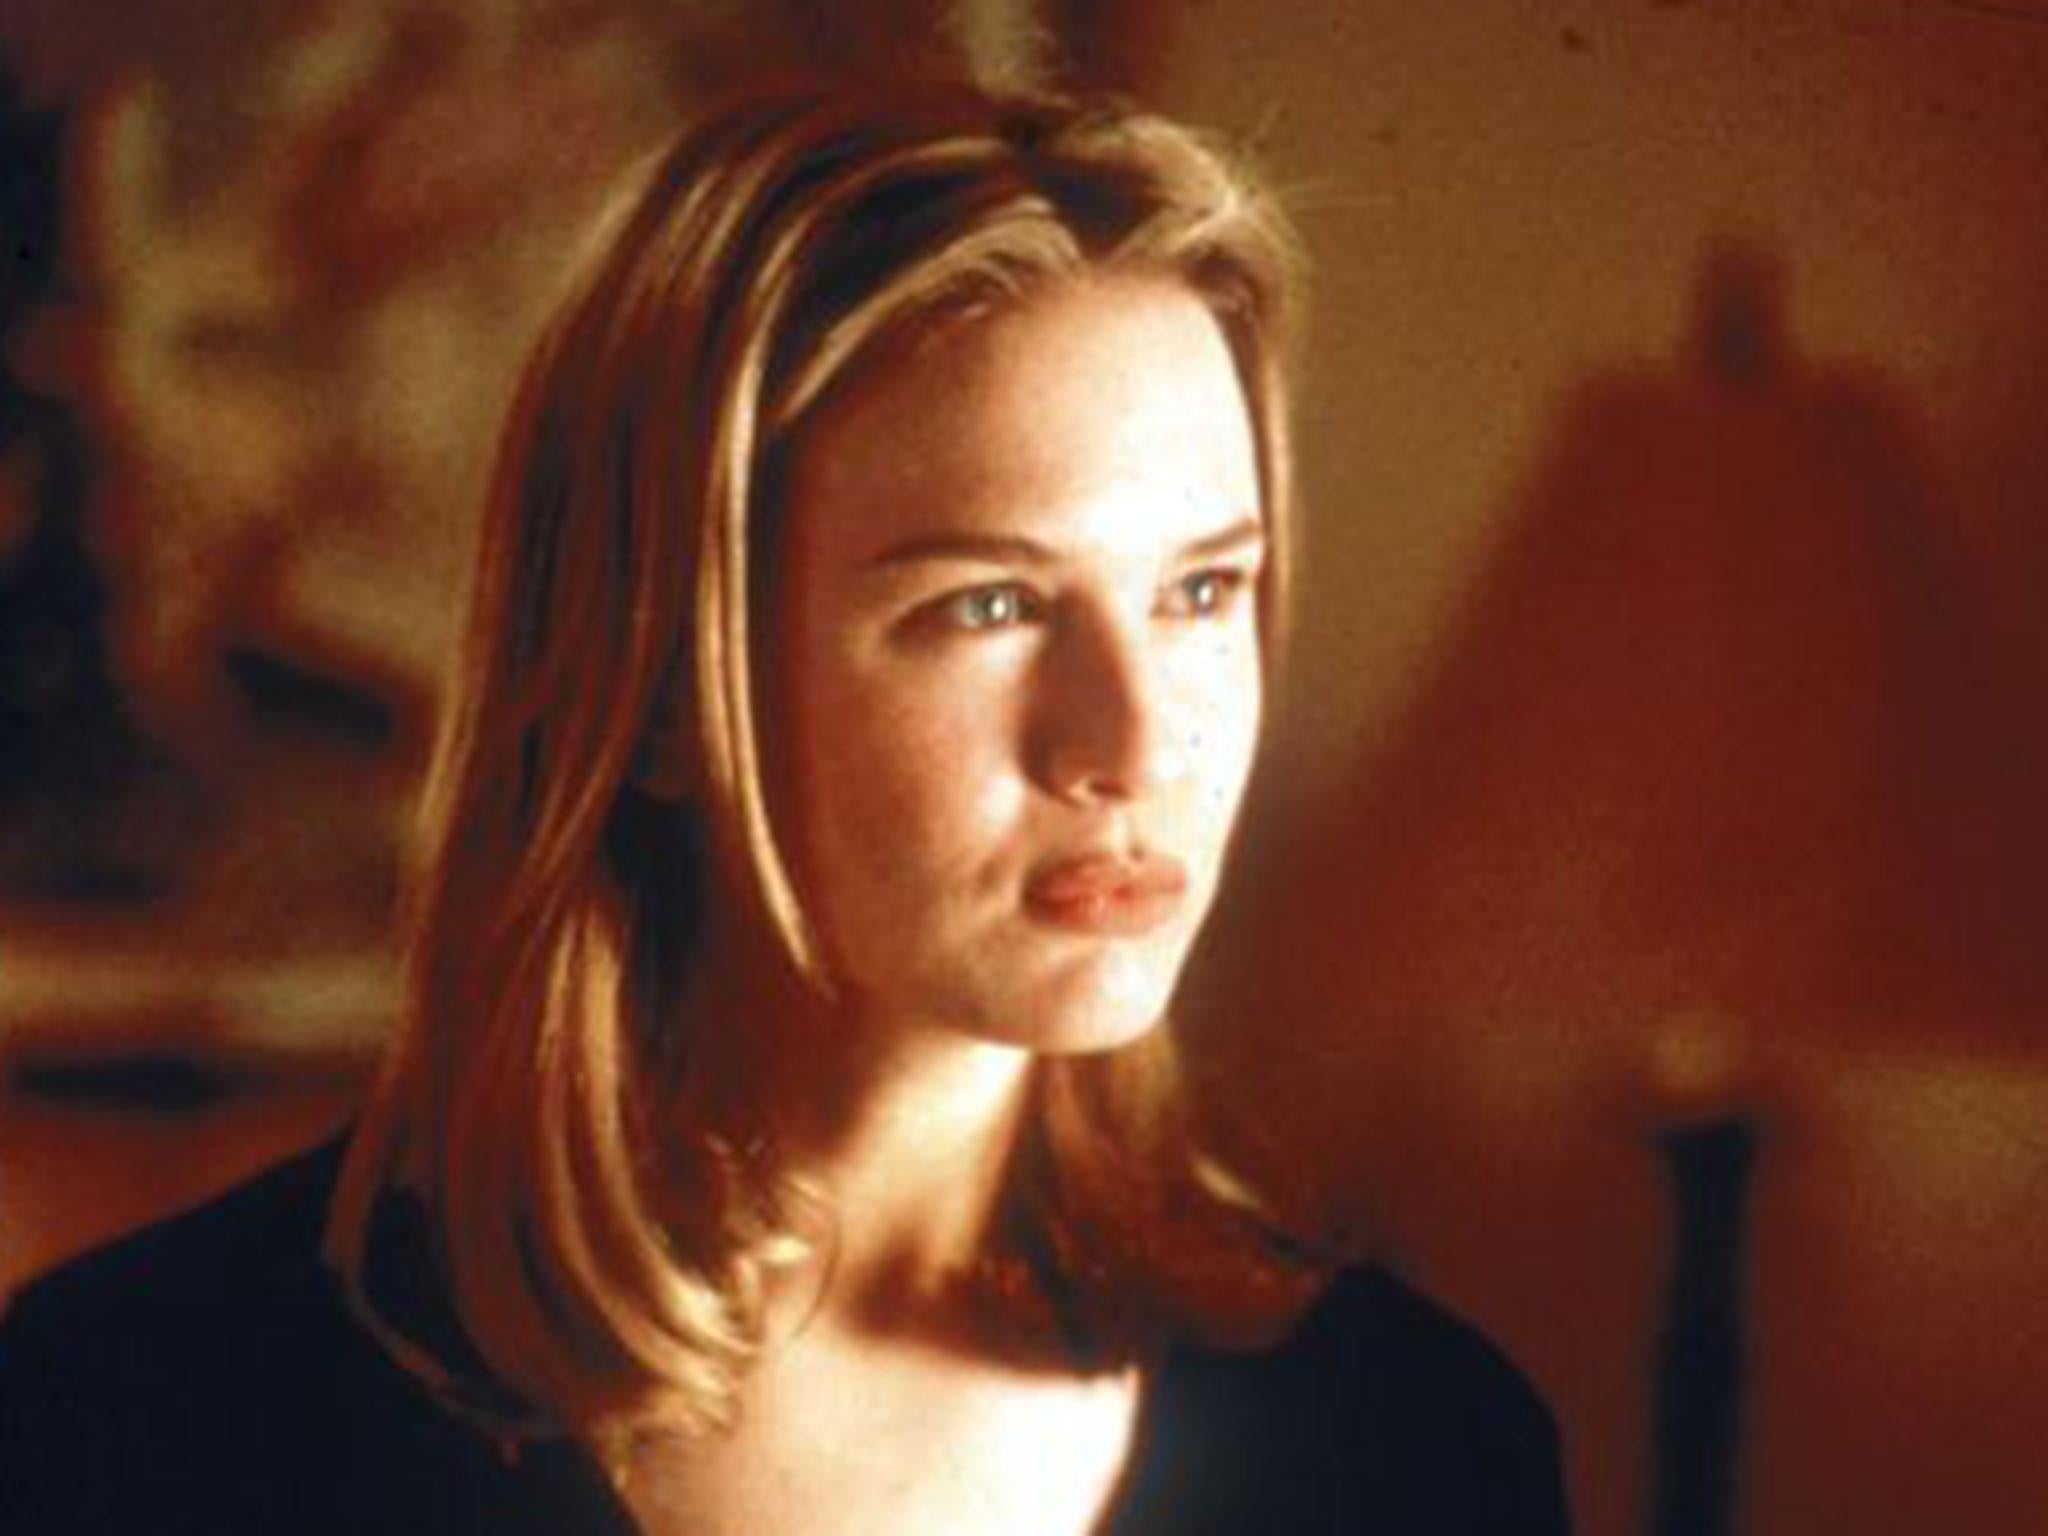 About face: Renée Zellweger in Jerry Maguire in 1997